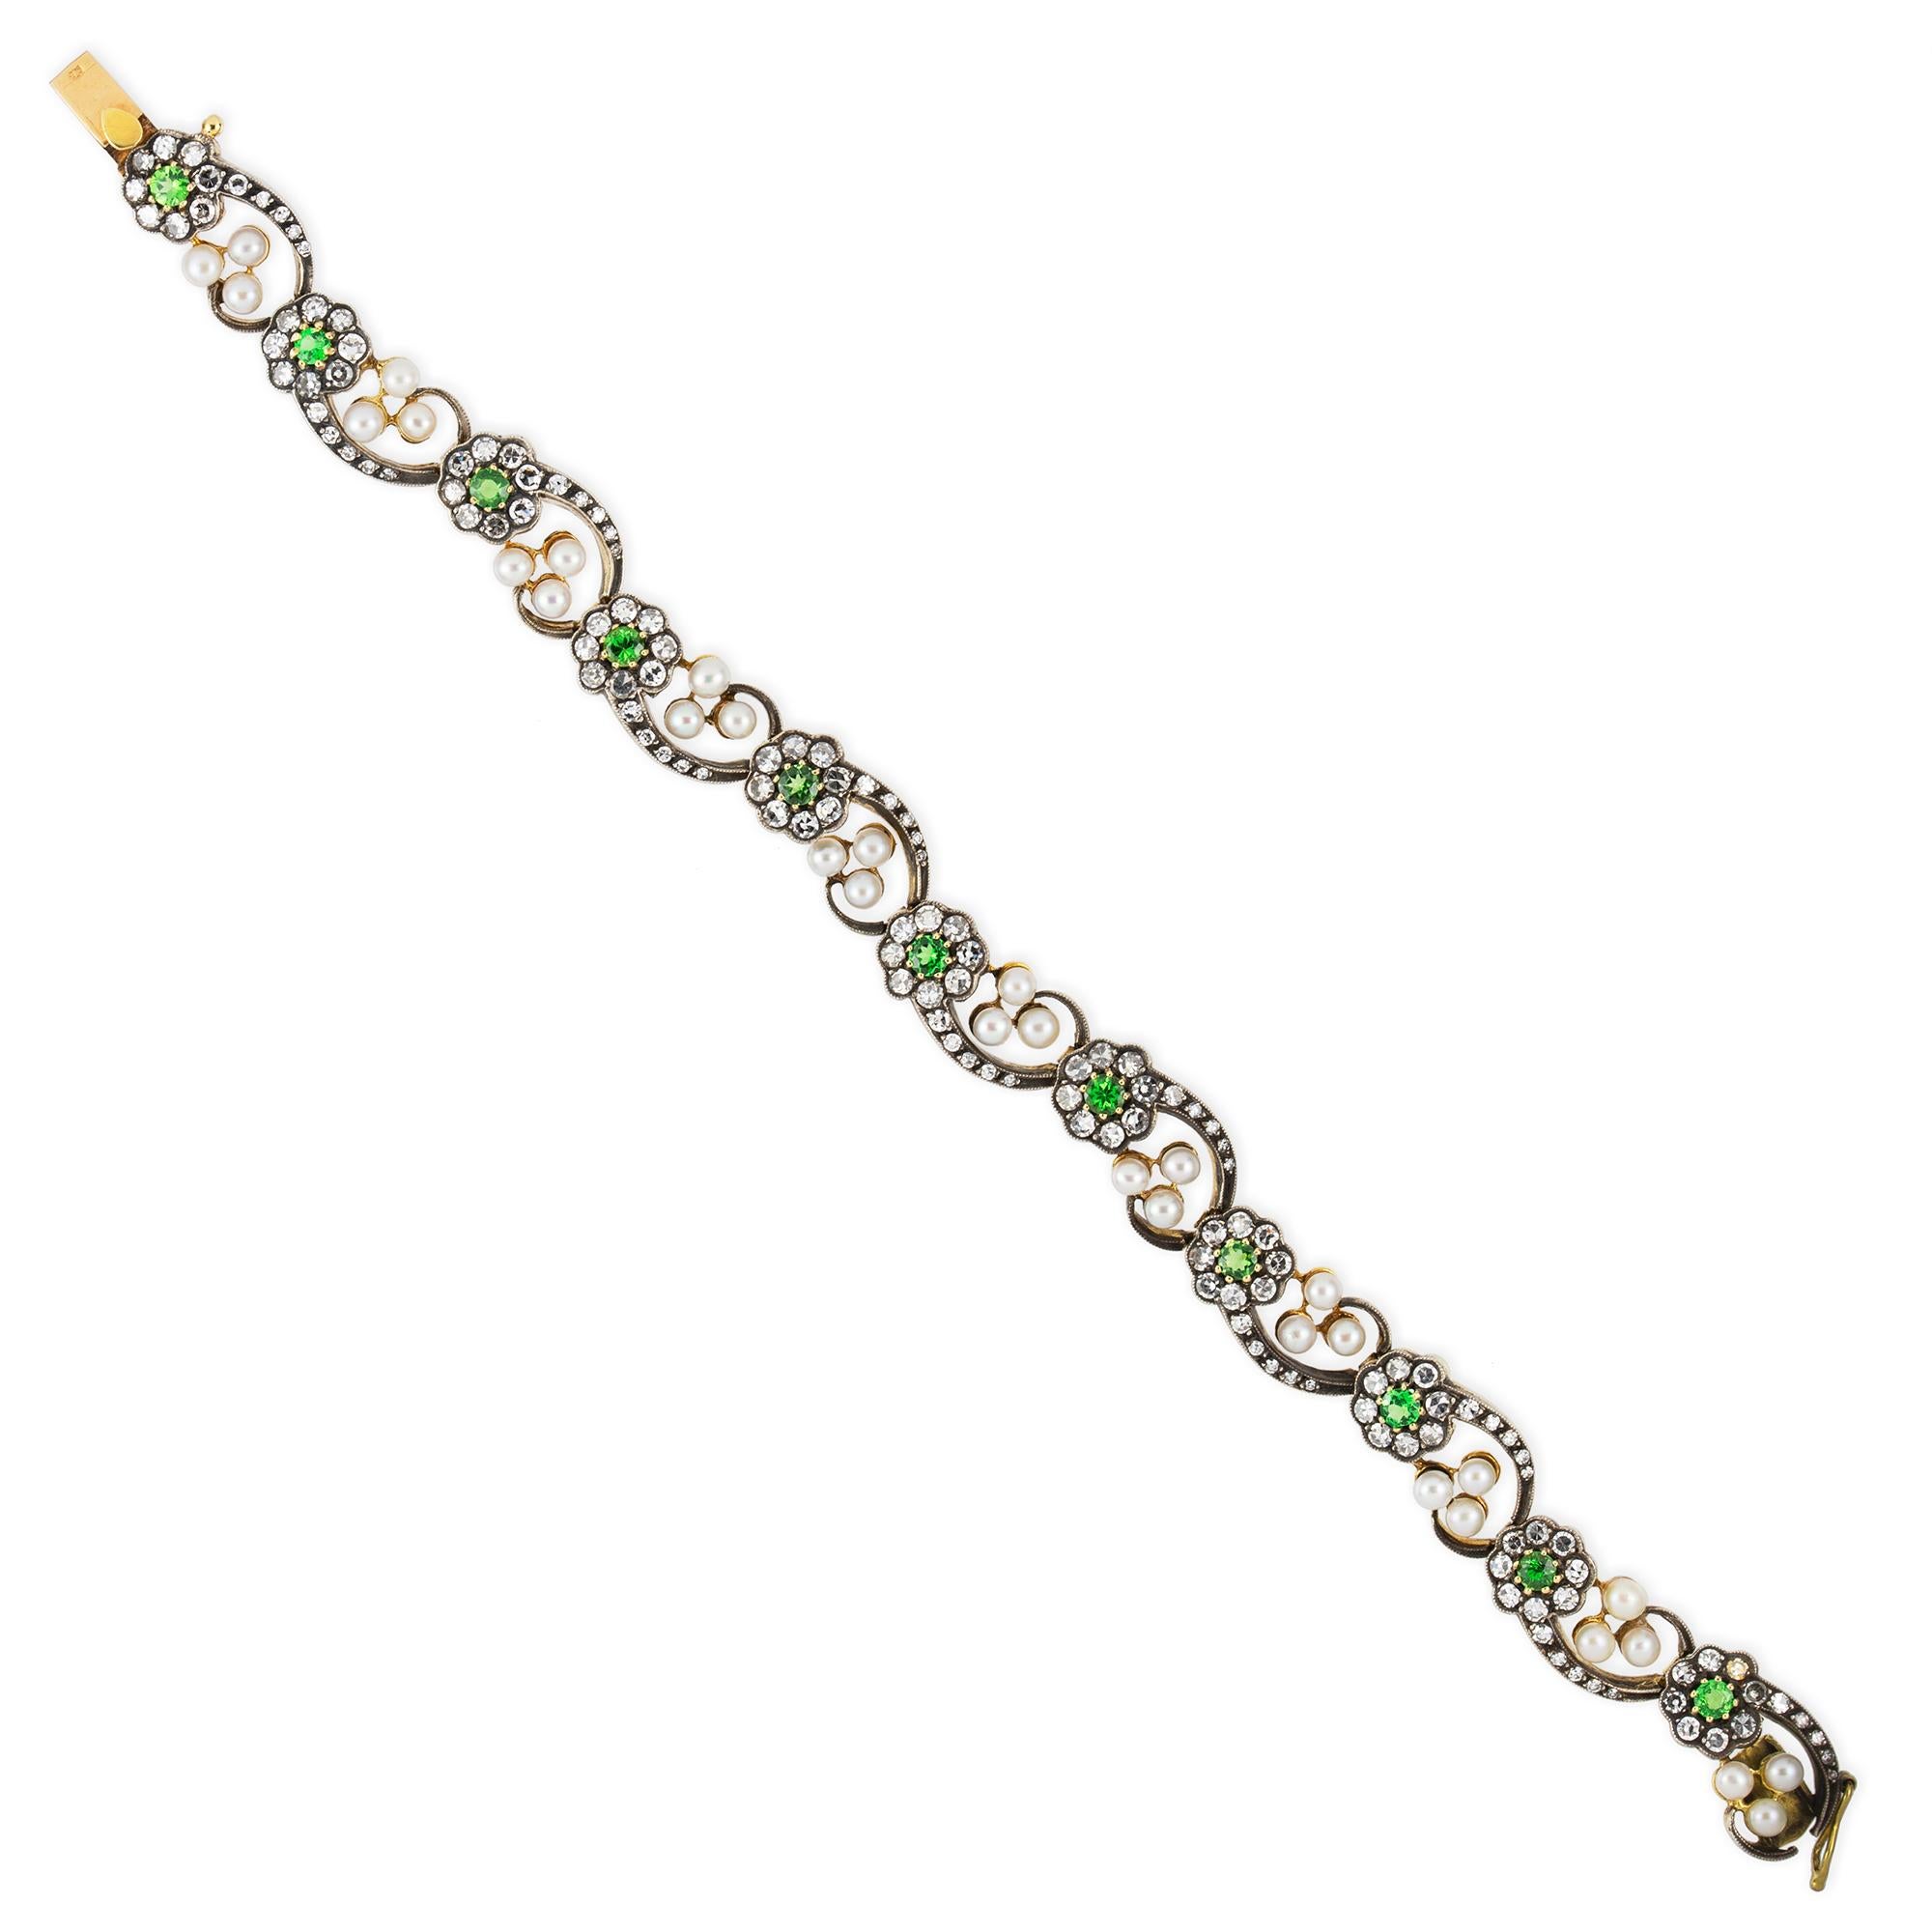 A turn of the century demantoid garnet and diamond bracelet, consisted of eleven links each bearing a flower with a demantoid garnet centre, swiss-cut diamond encrusted petals and stems terminating to pearl-set trefoil, mounted in silver and yellow